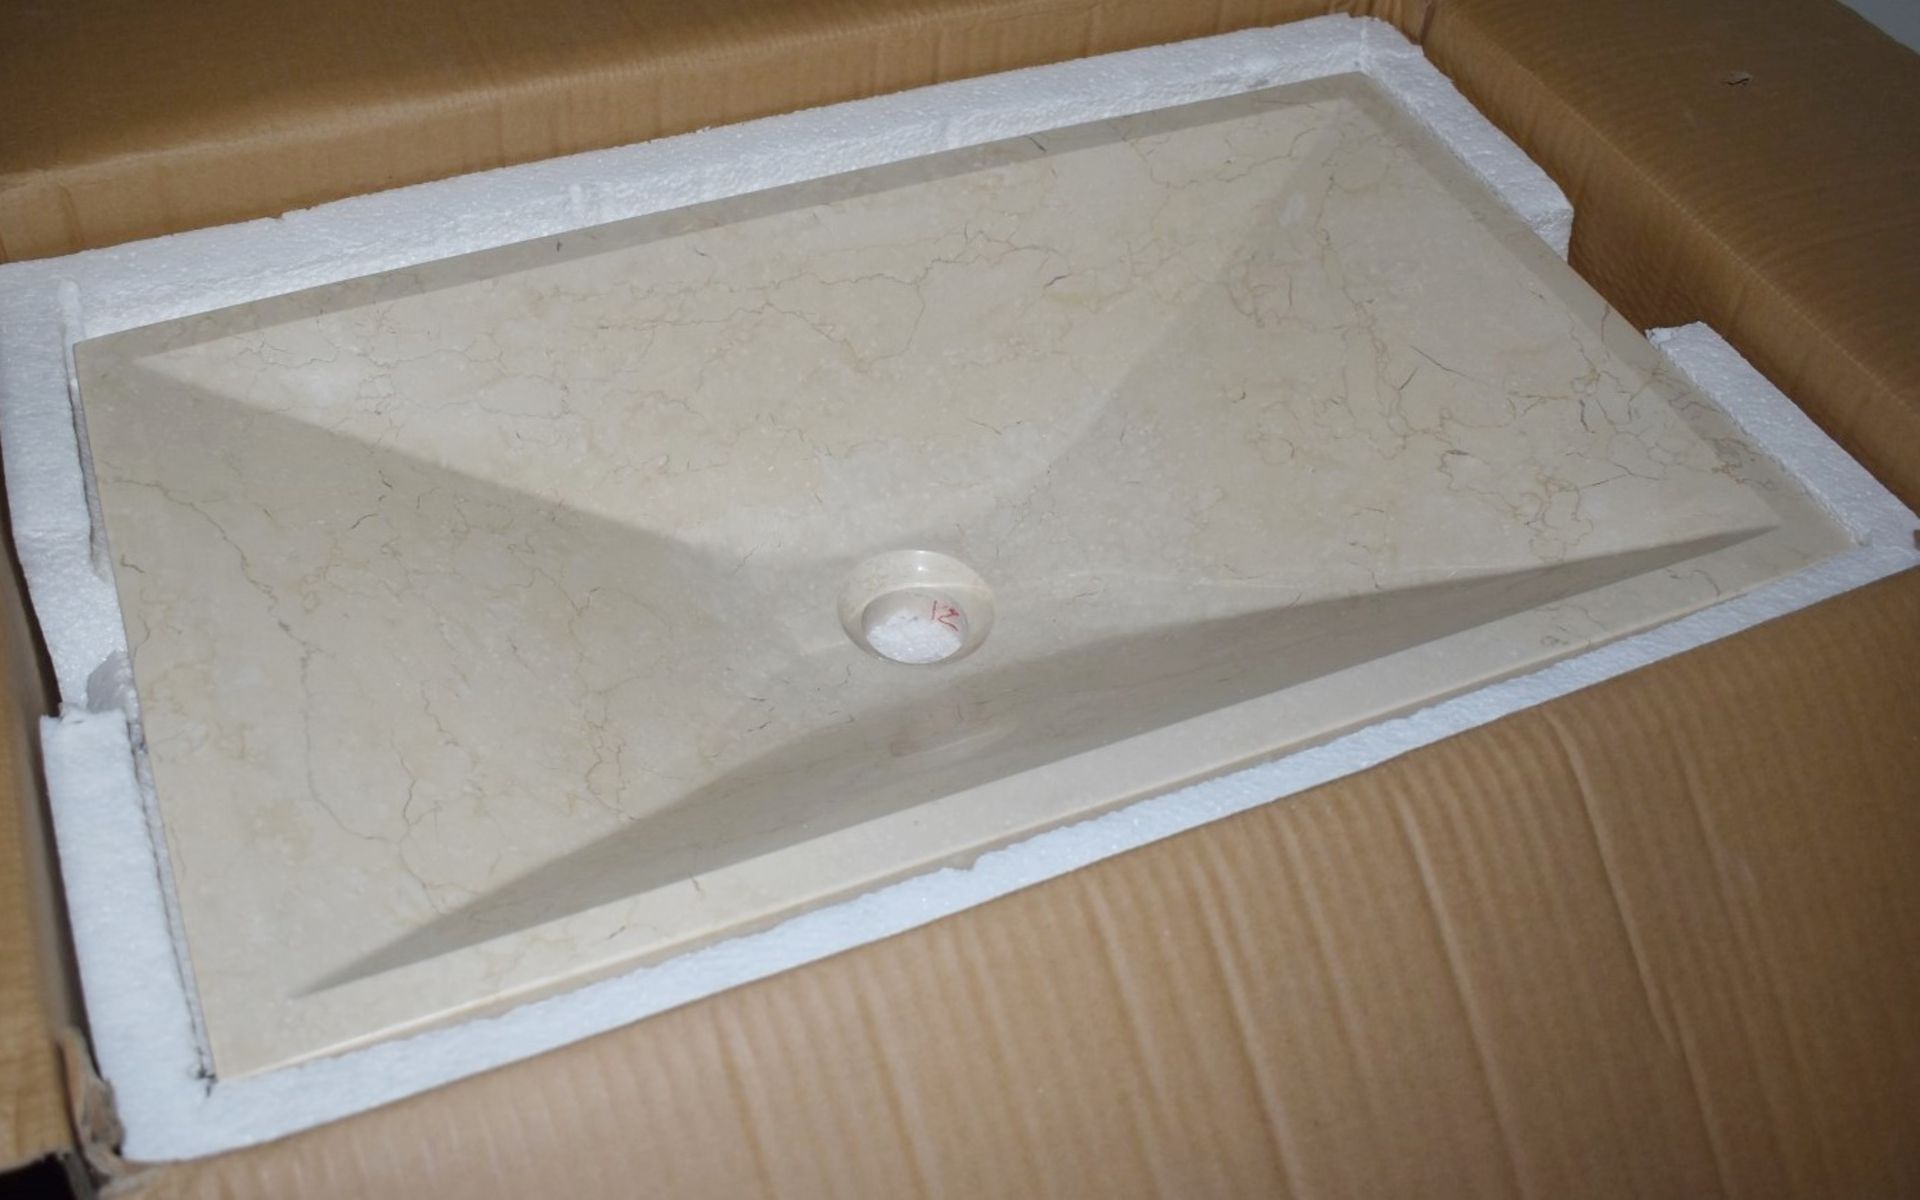 1 x Stonearth 'Karo' Solid Travertine Stone Countertop Sink Basin - New Boxed Stock - RRP £525 - - Image 3 of 8